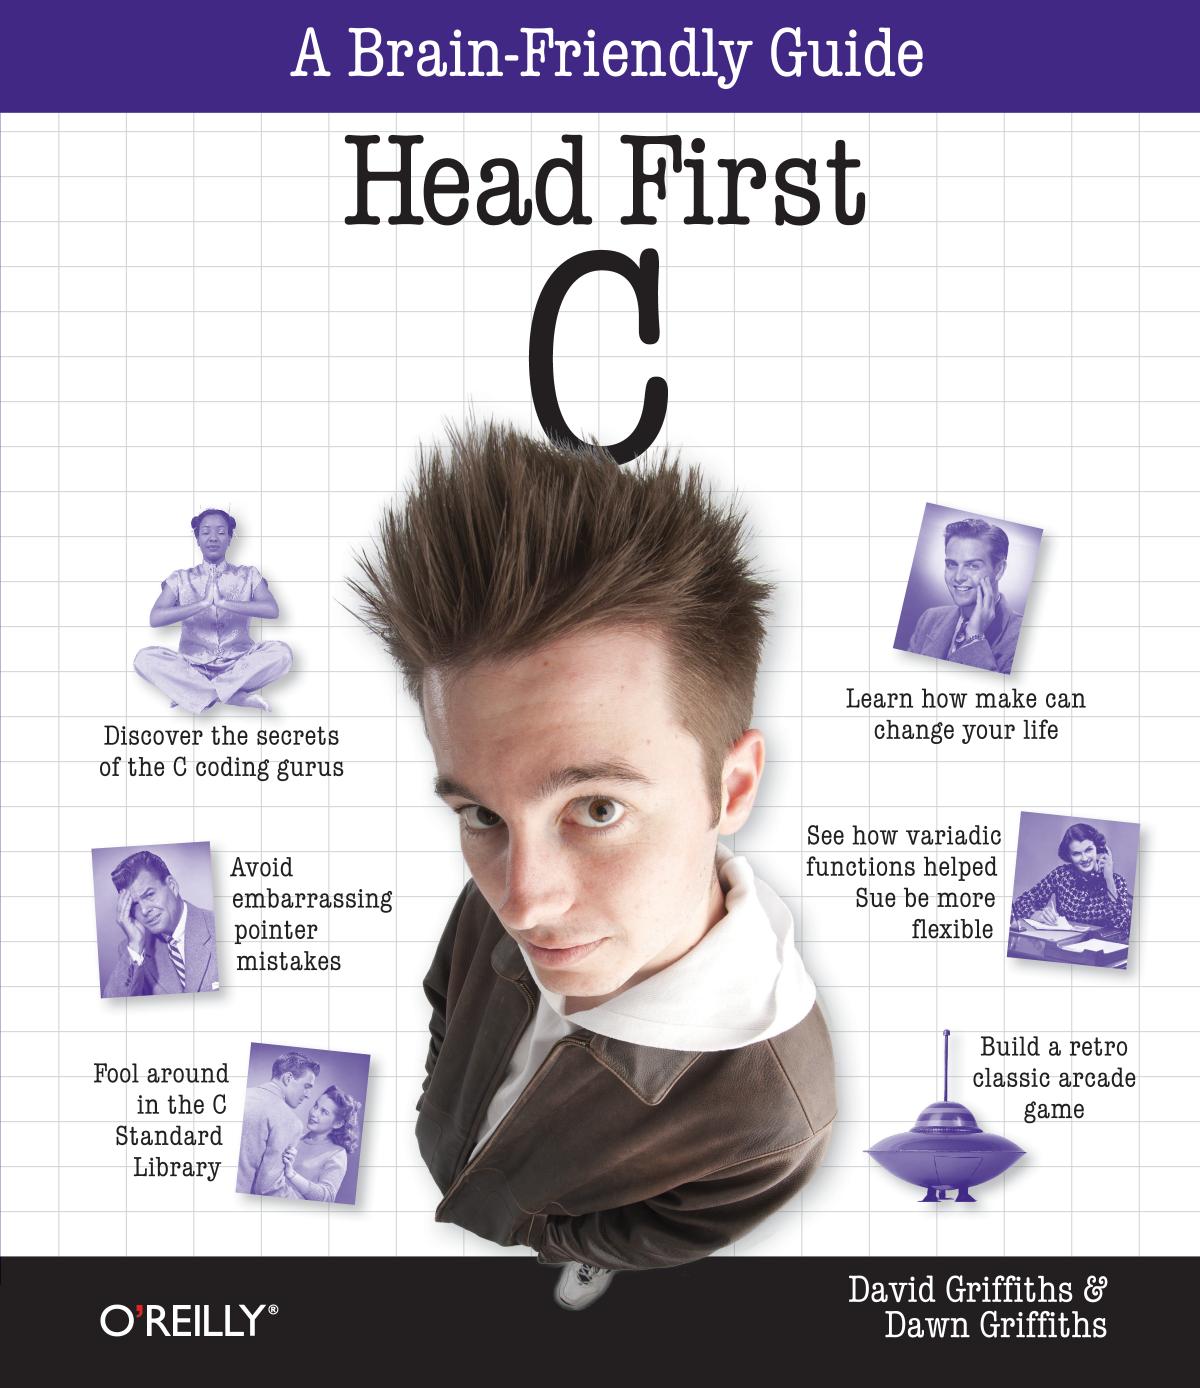 Head First C by David Griffiths and Dawn Griffiths